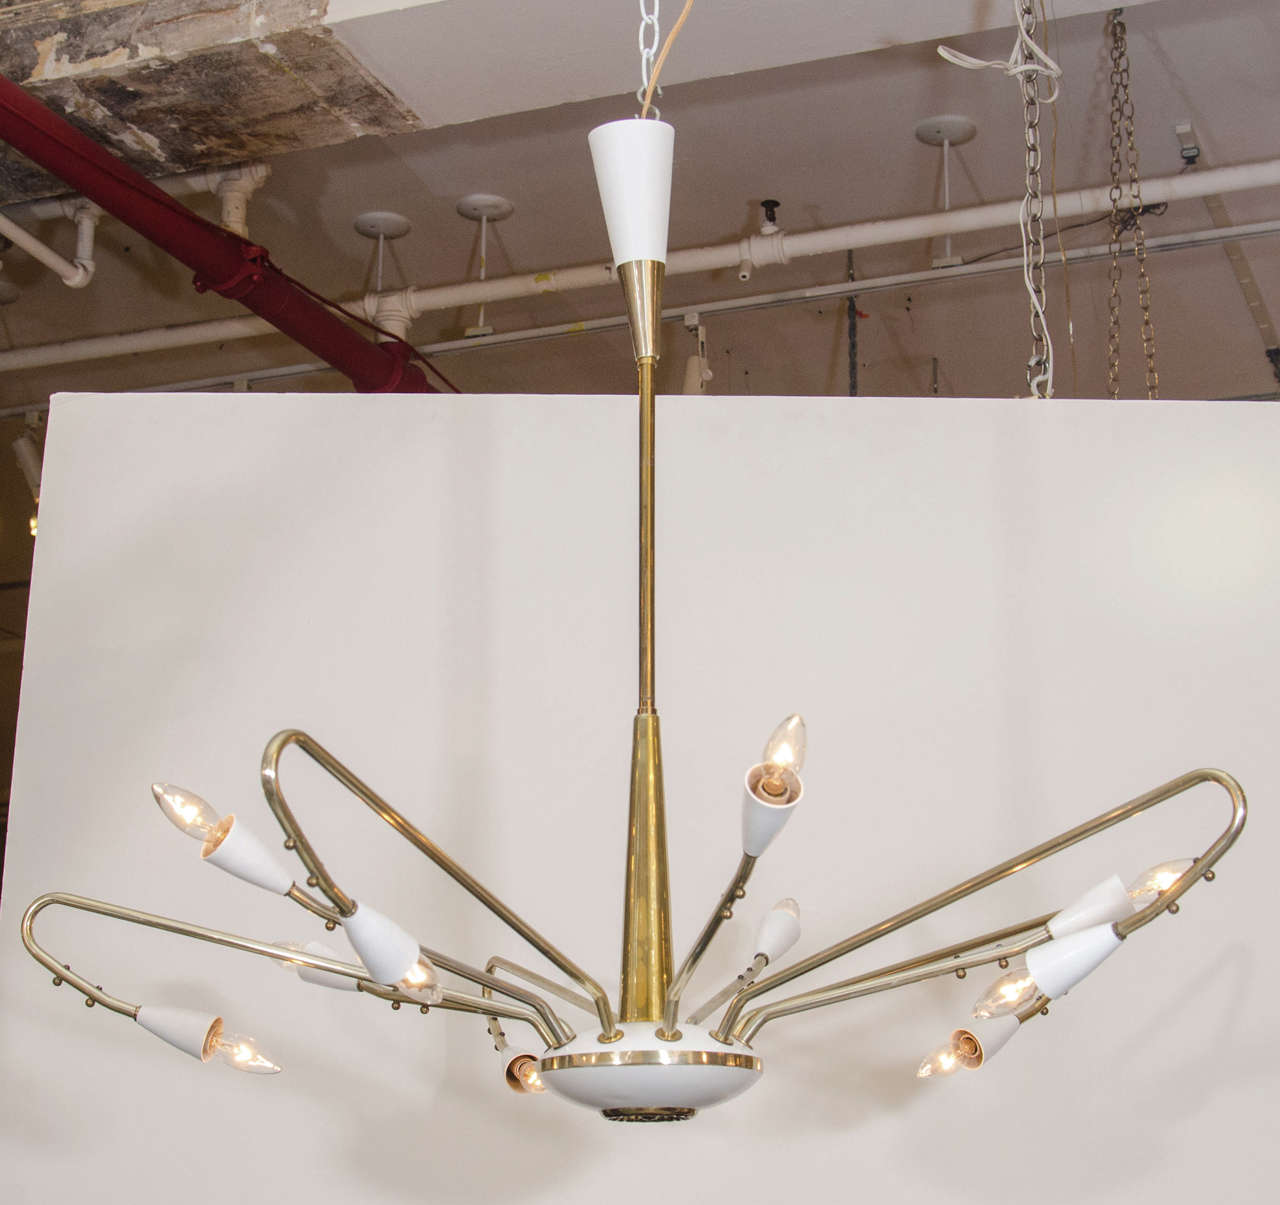 Beautiful and chic! A gracefully formed chandelier pendant with brass arms and armature; trimmed in white and with original canopy. Please contact for location.